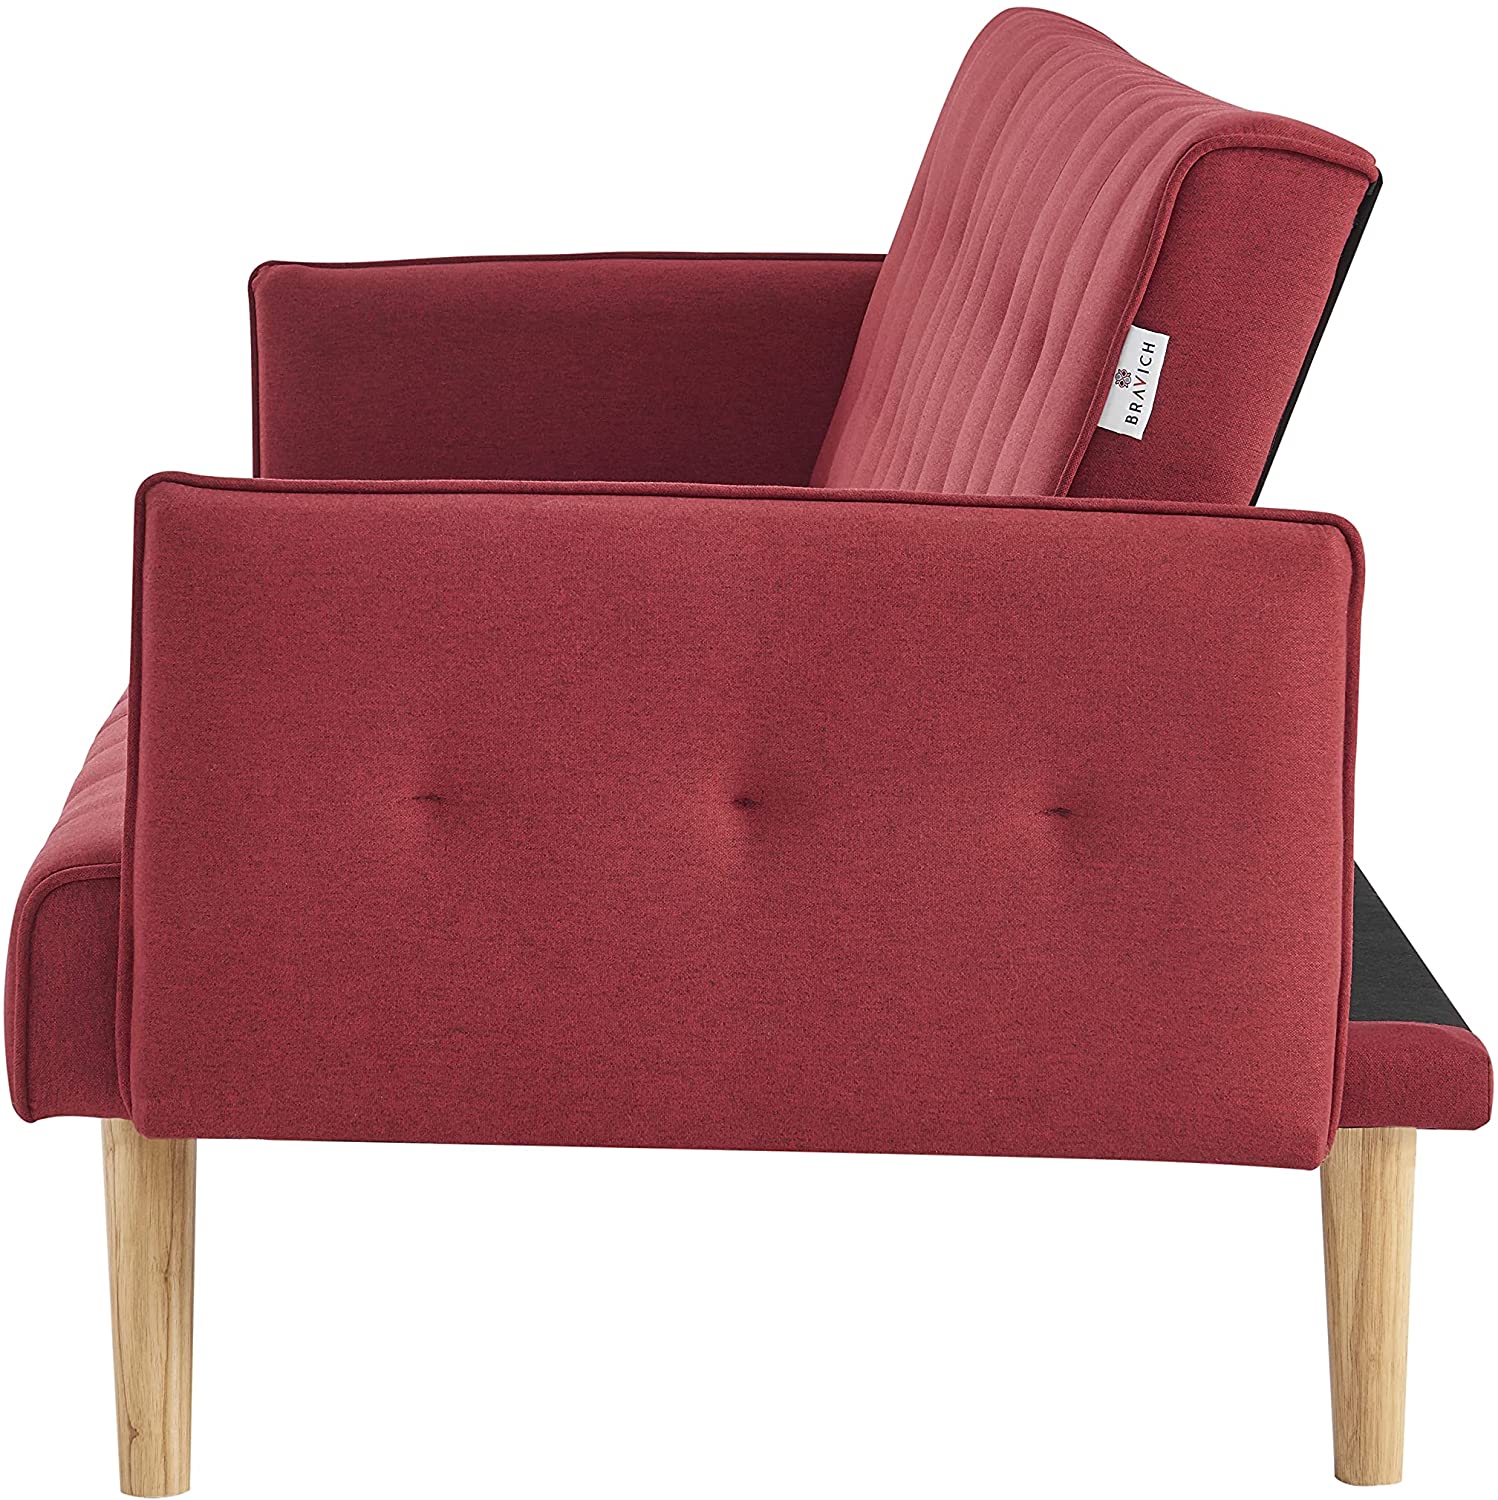 Mario 3 Seater Sofa Bed - Red